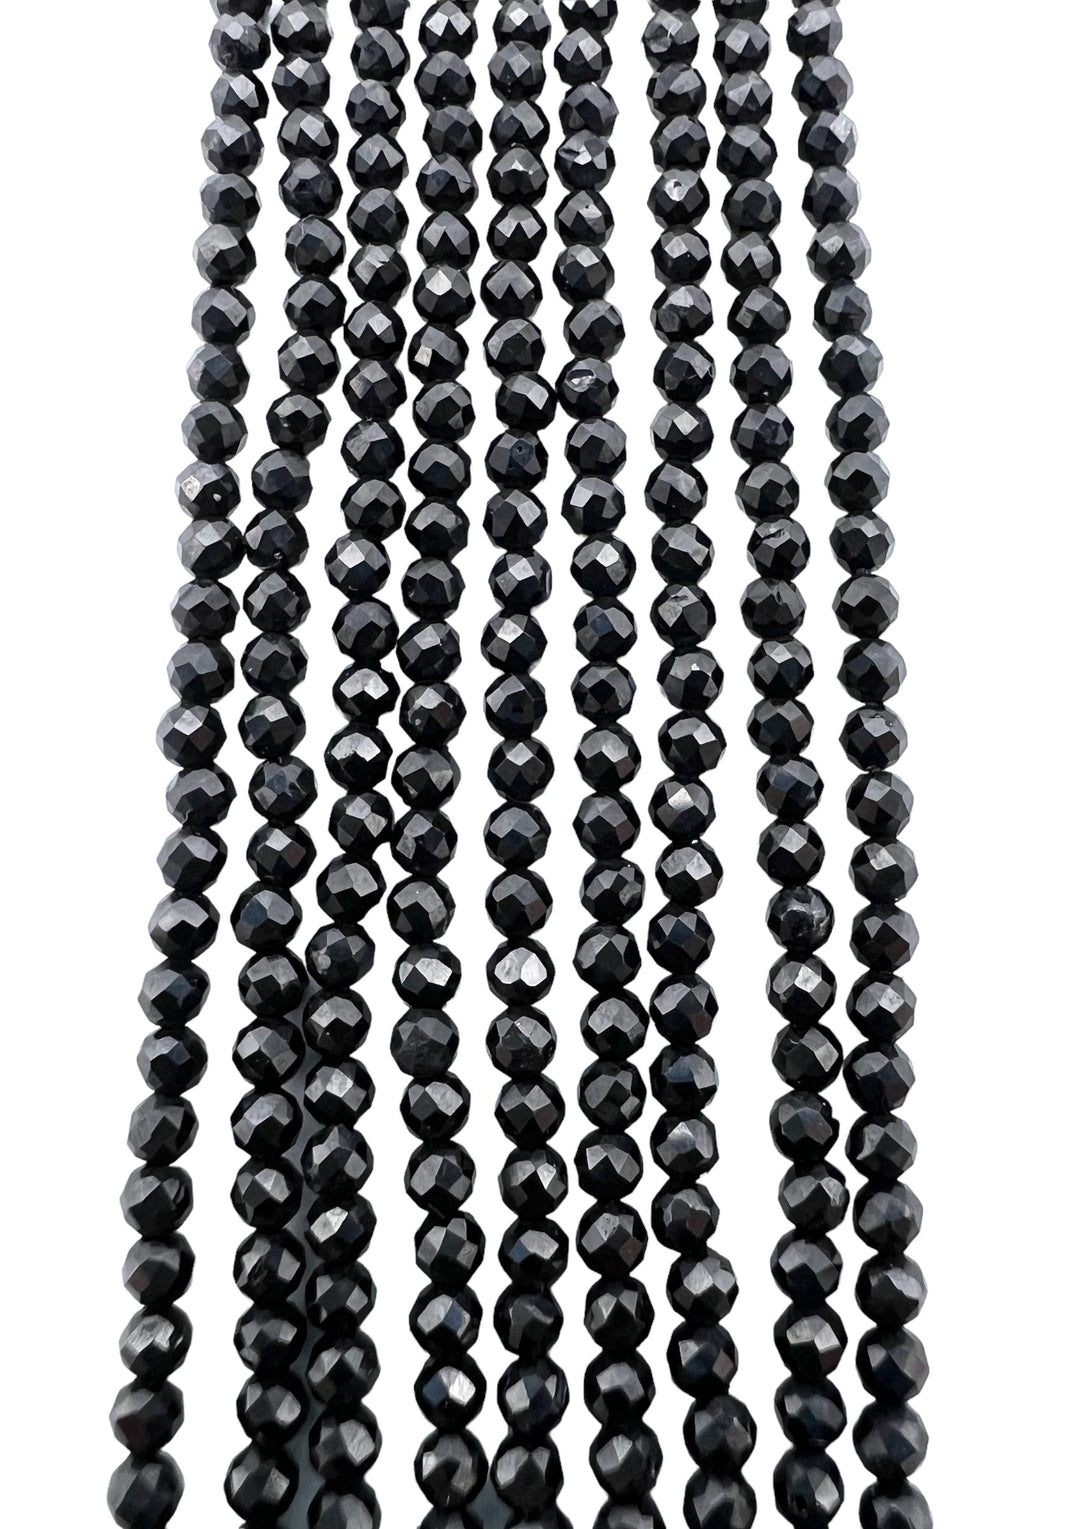 Black Spinel MICRO Faceted 2mm Round Beads sold in 13 inch